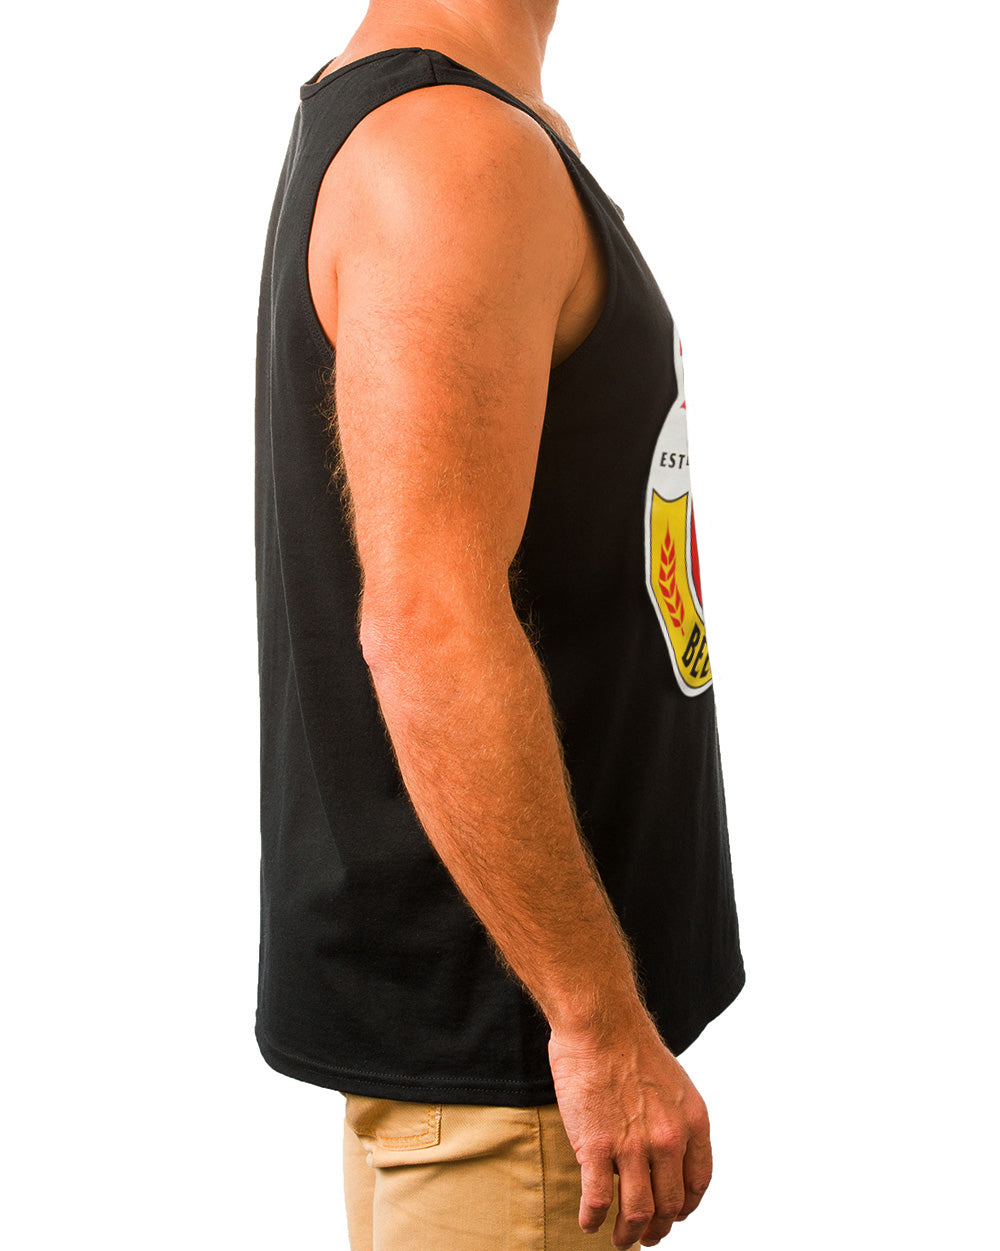 Lion Red Singlet -  Beer Gear Apparel & Merchandise - Speights - Lion Red - VB - Tokyo Dy merch